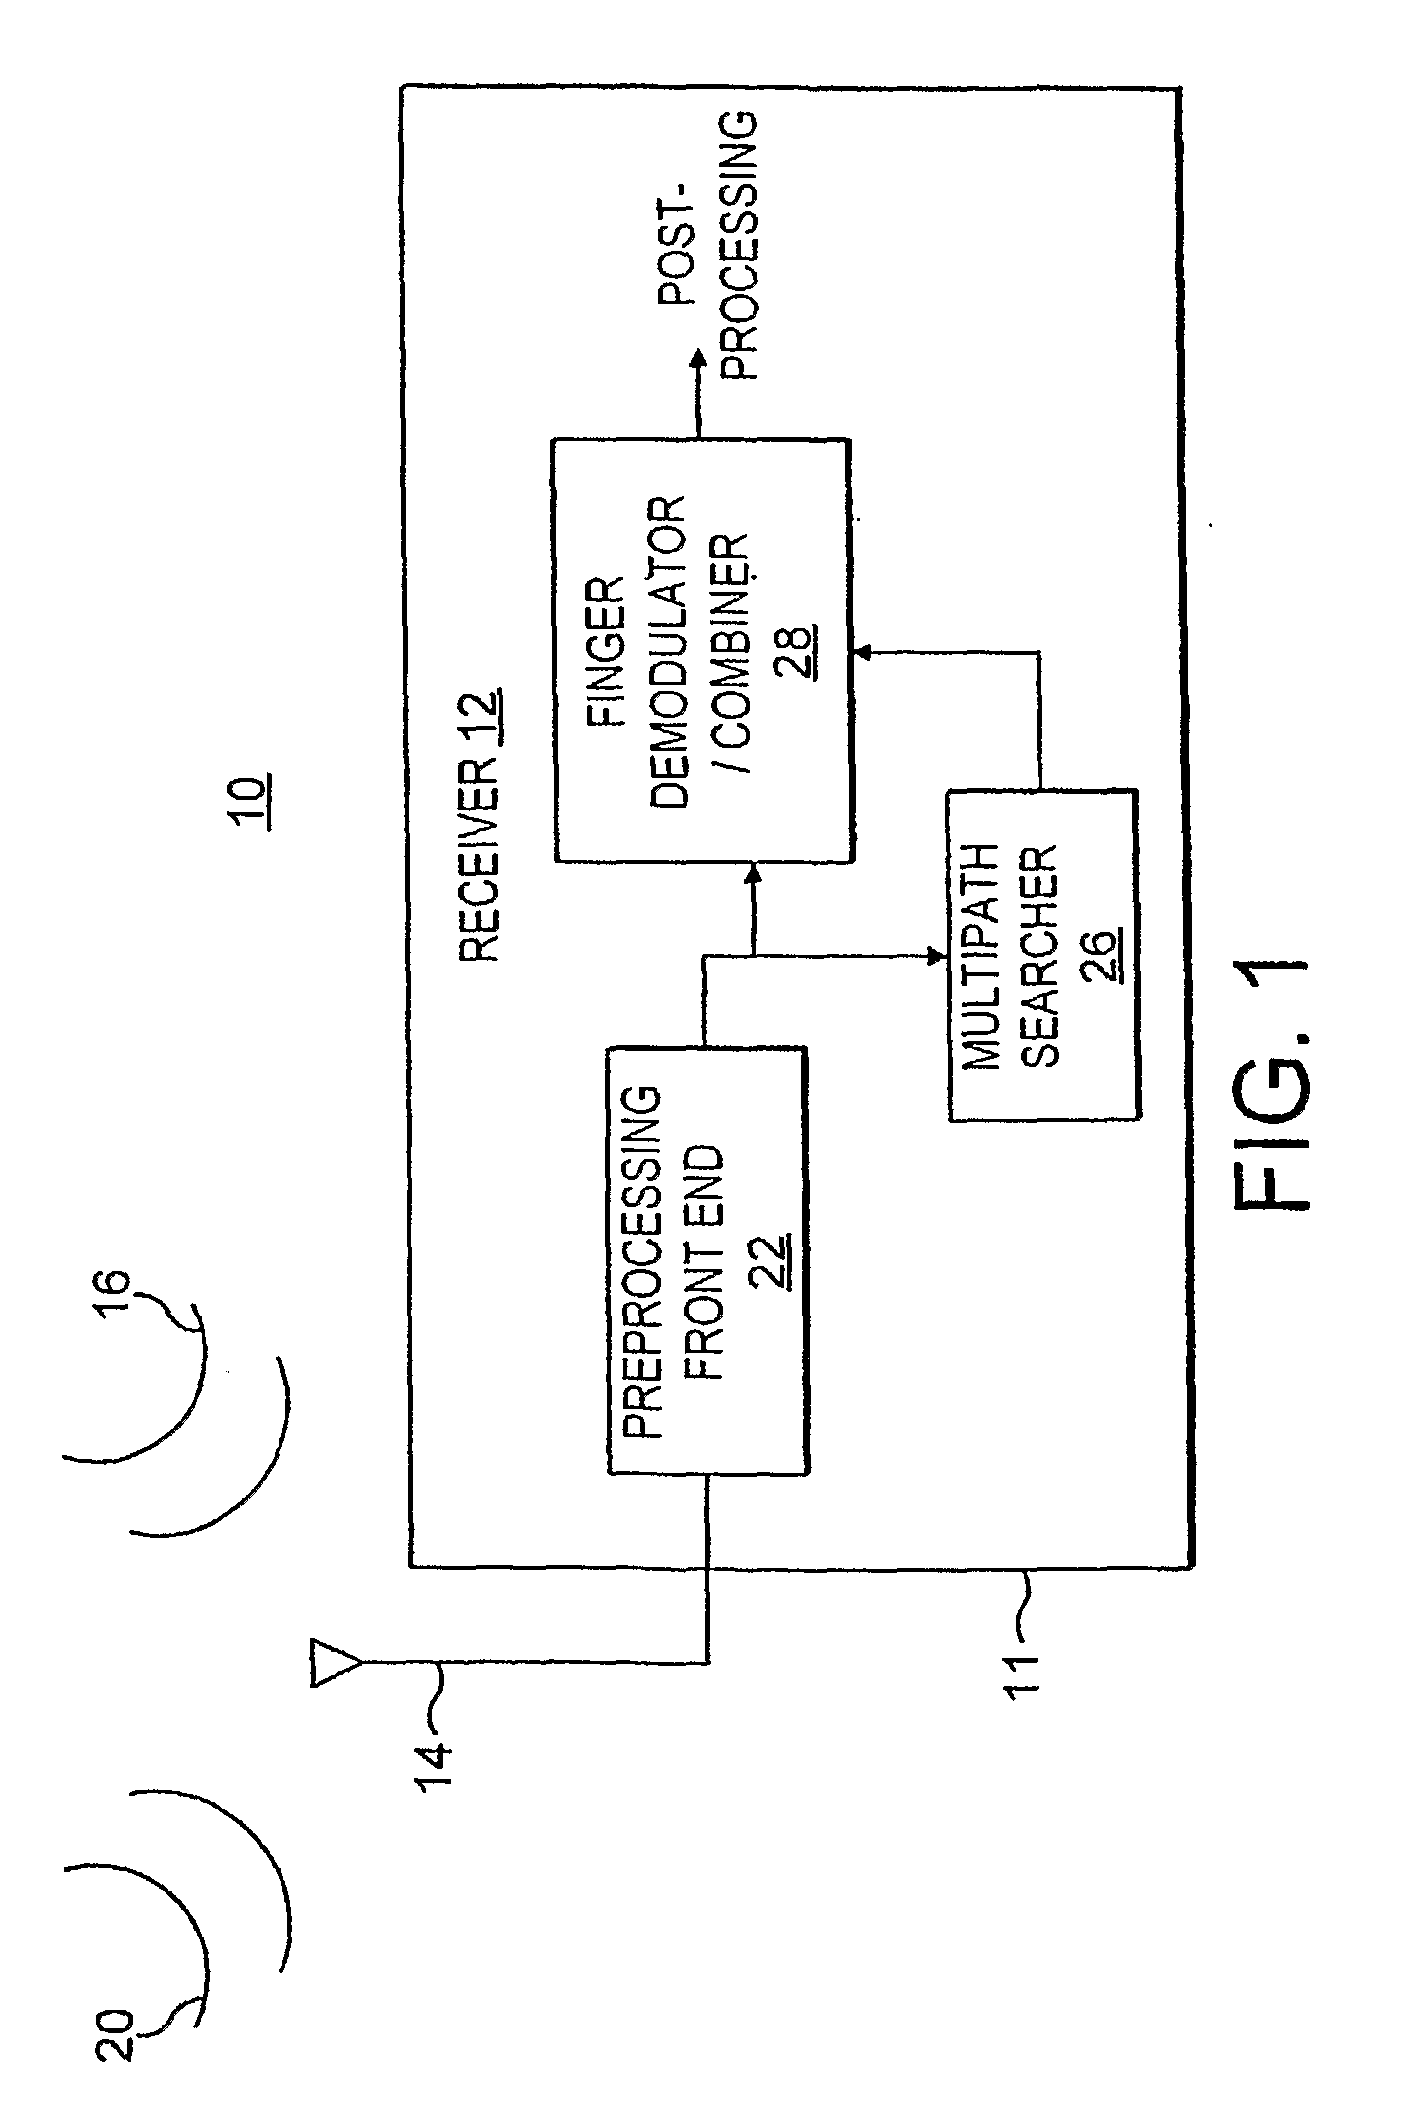 Method and Apparatus for Multiresolution / Multipath Searcher